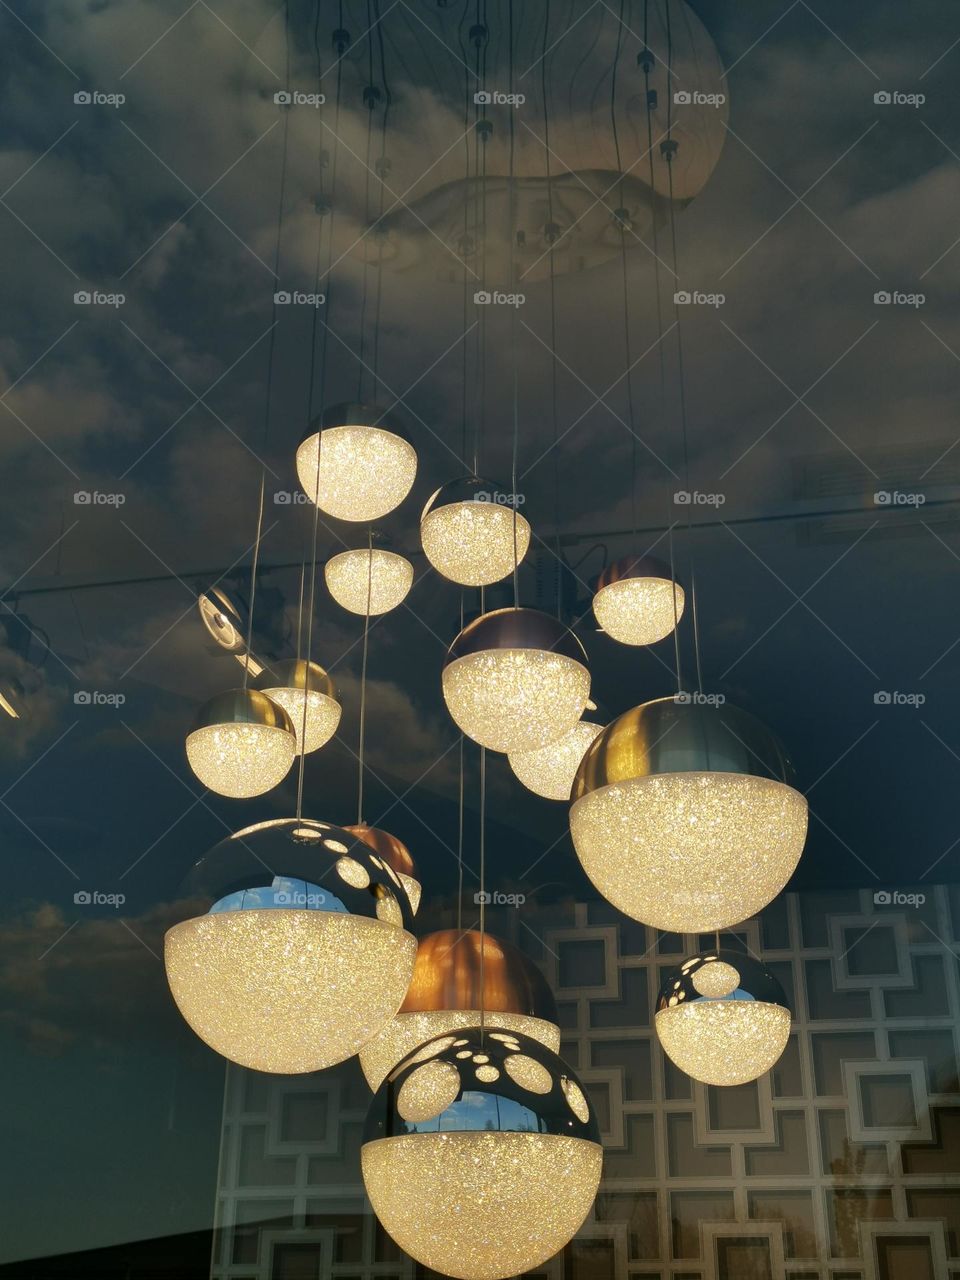 Shop window with chandeliers. Beautiful chandelier. Reflections in the glass, in the window.